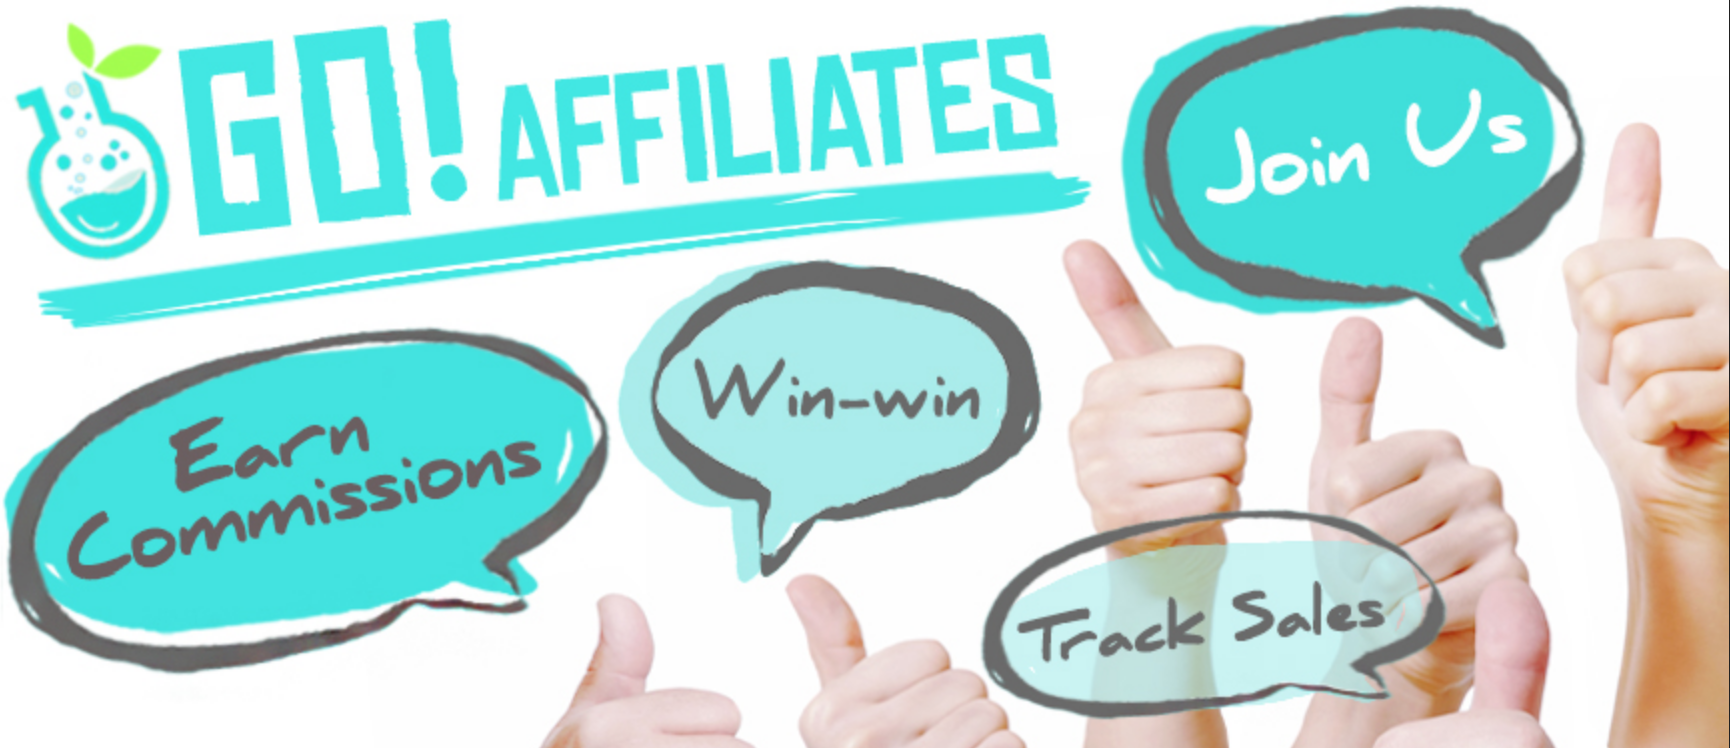 Want tips. Affiliate marketing.